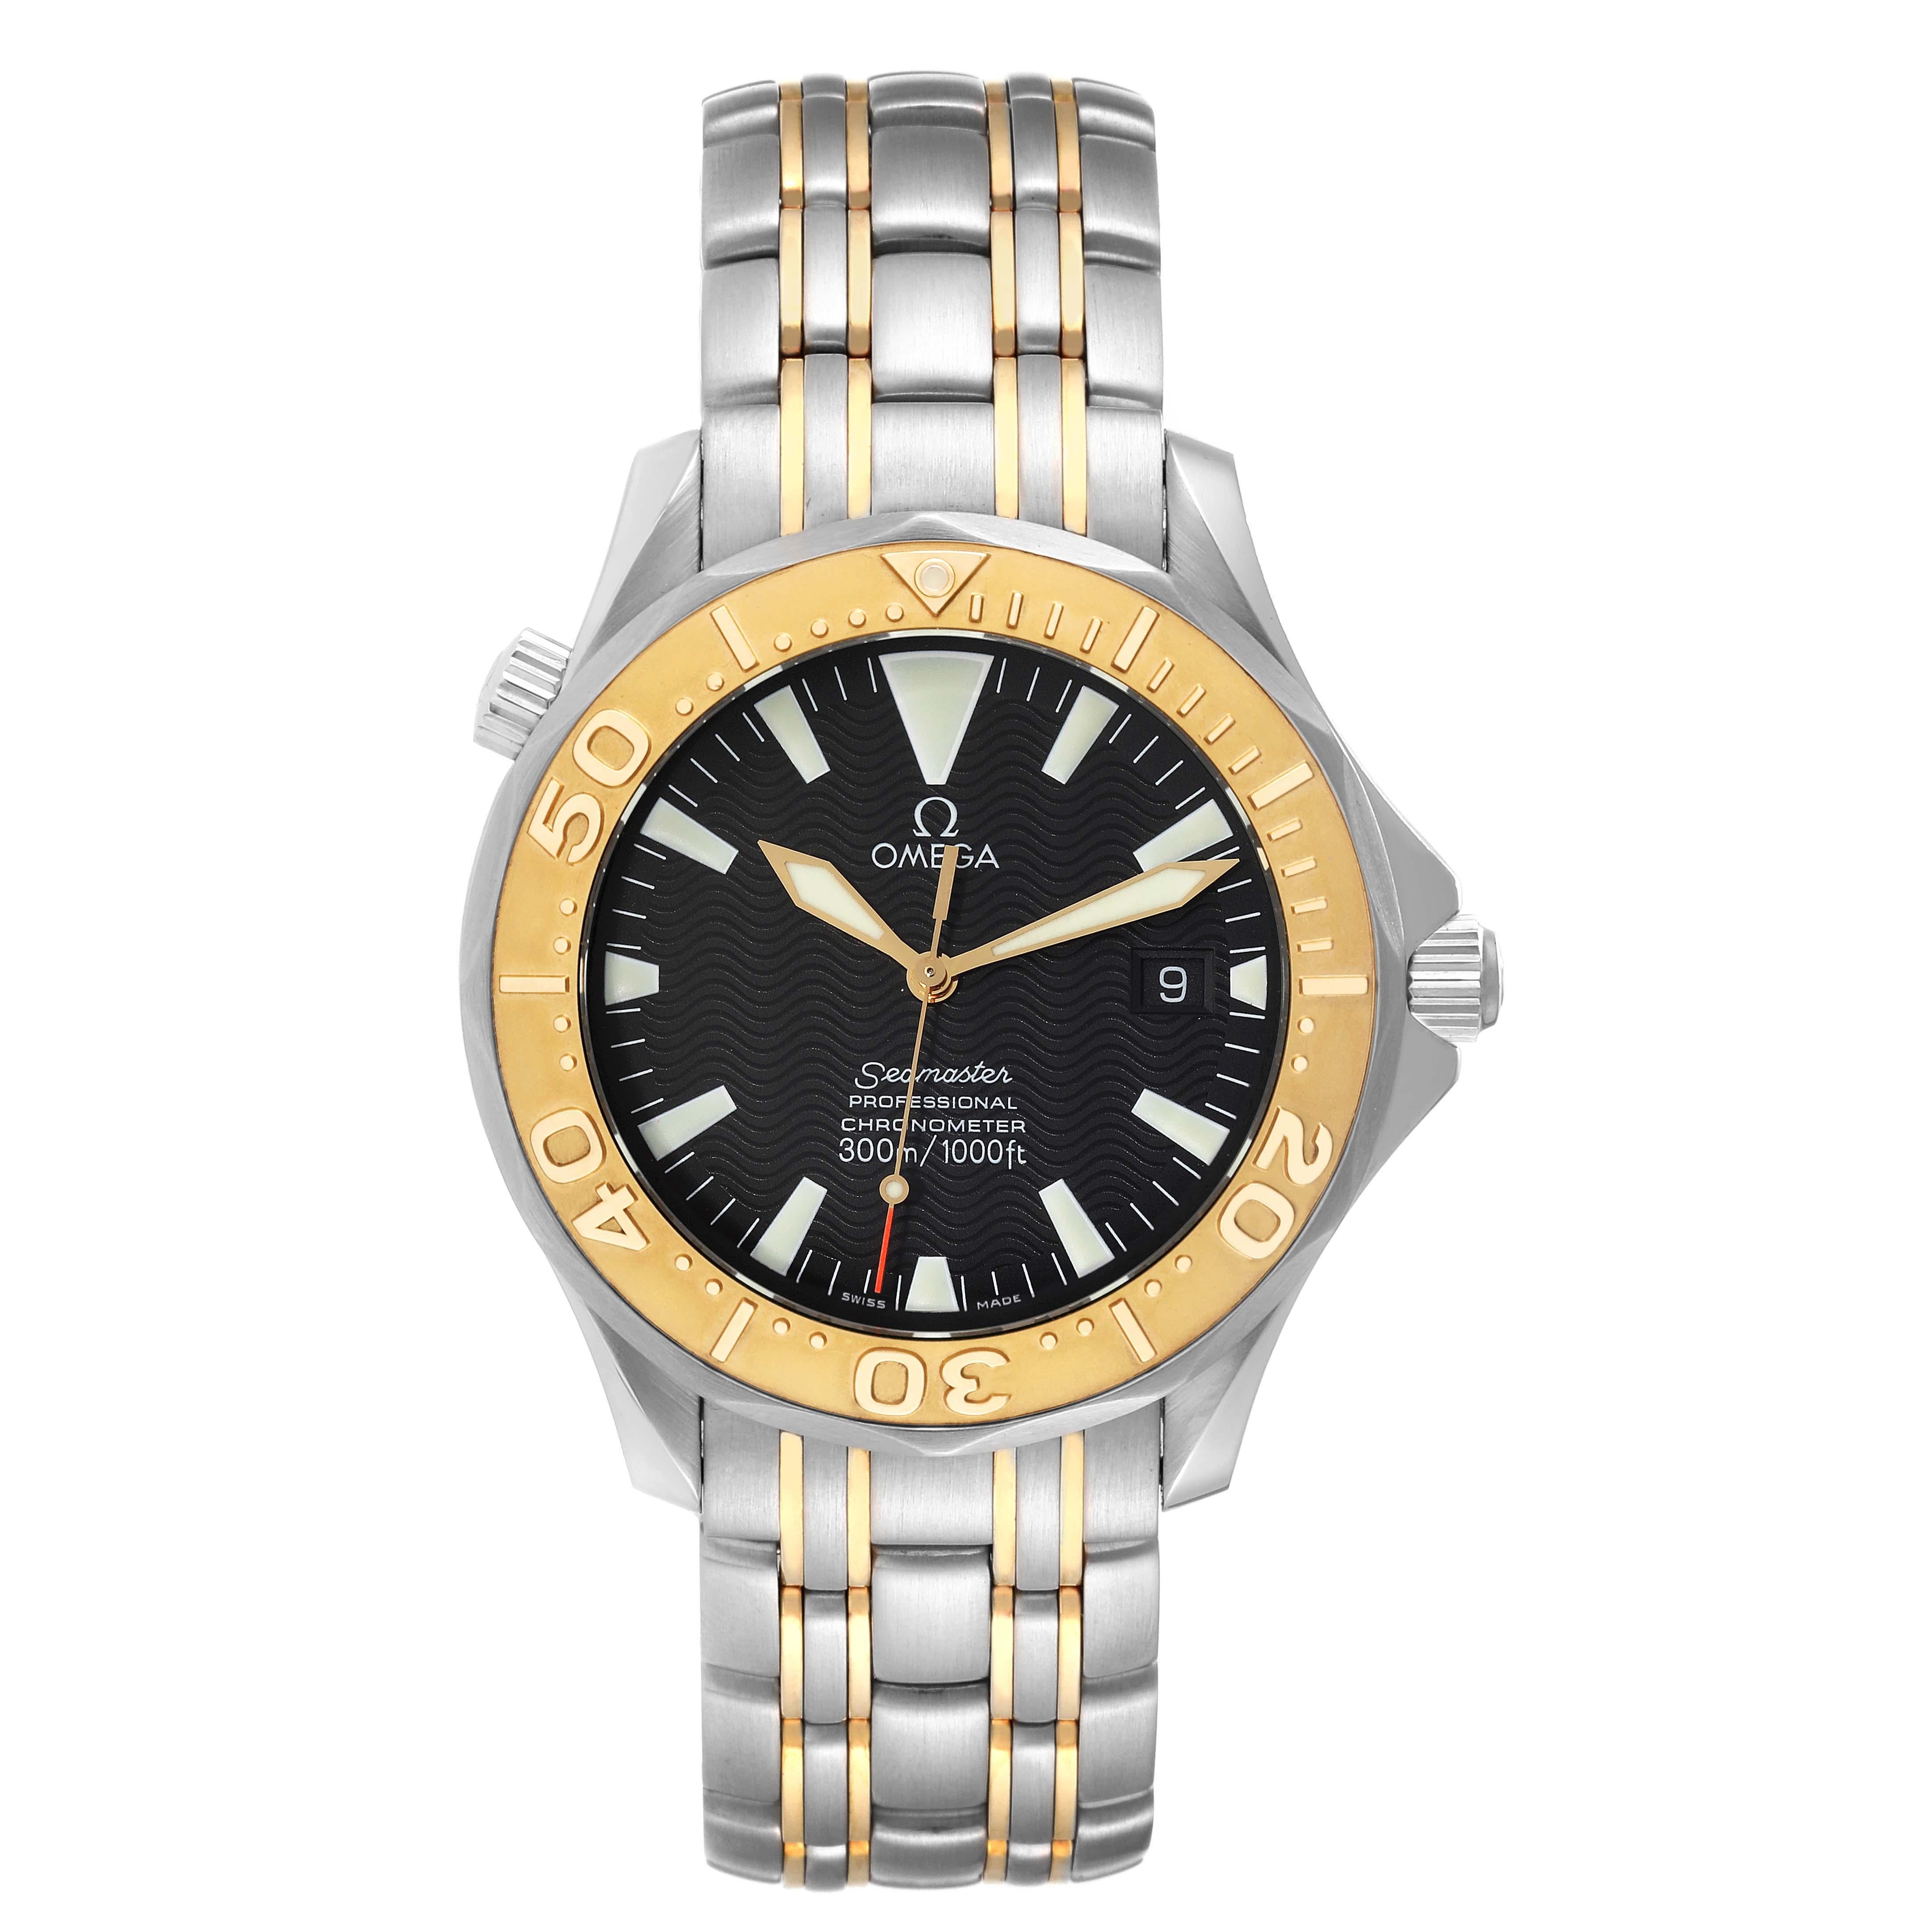 Omega Seamaster Steel Yellow Gold Automatic Mens Watch 2455.50.00 Card. Automatic self-winding movement. Stainless steel round case 41.0 mm in diameter. 18K yellow gold unidirectional rotating bezel. Scratch resistant sapphire crystal. Black wave